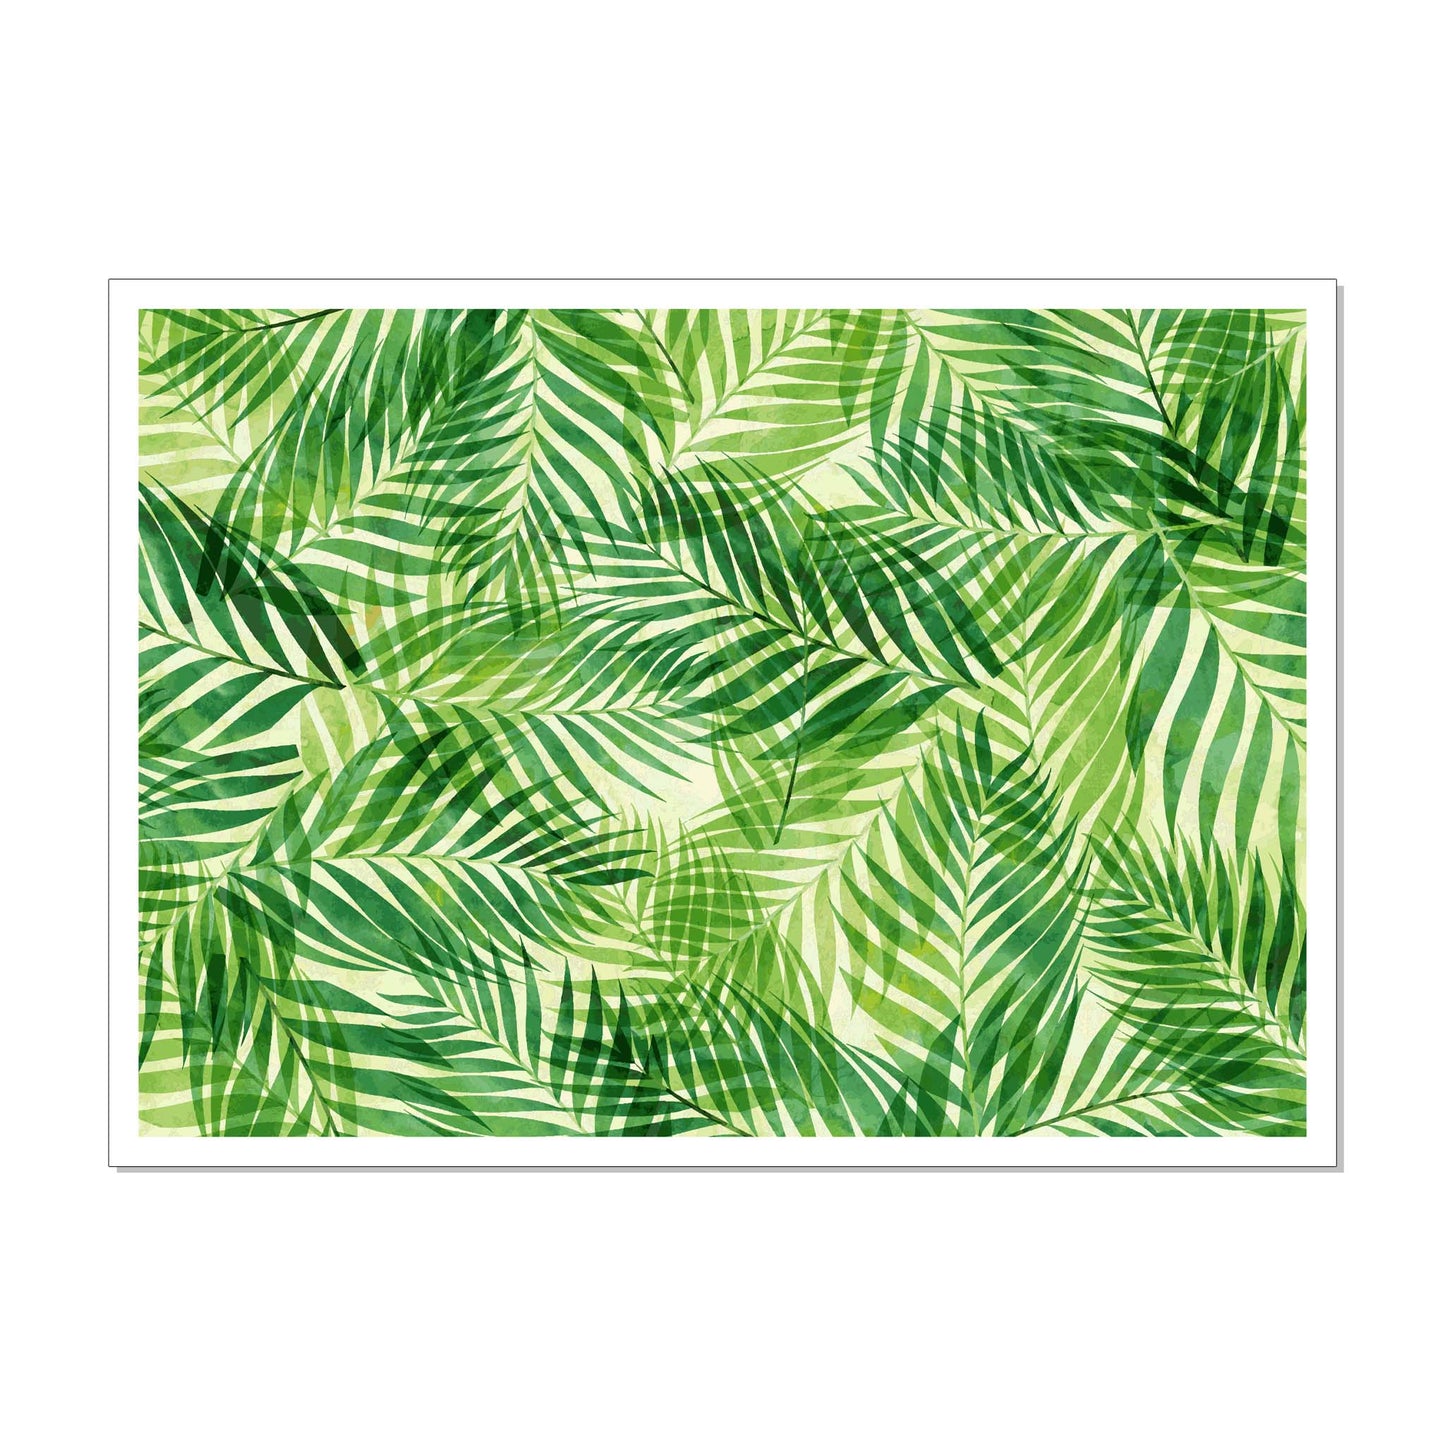 Add these palm leaves icing cake wrap on cakes or any sweet treats. Perfect for birthdays, weddings, baby showers or any special event.  Available sizes;  A4 Icing Sheet, printable area, is 20 cm x 26 cm (8’ x 10.5’). This sheet will cover a cake up to 4 inches high, 6 inches (diameter) round cake. A3 Icing Sheet, printable area, is 28 cm x 39 cm (11’ x 15.5″). This sheet will cover a cake up to 5.5 inches high, 9 inches (diameter) round cake.